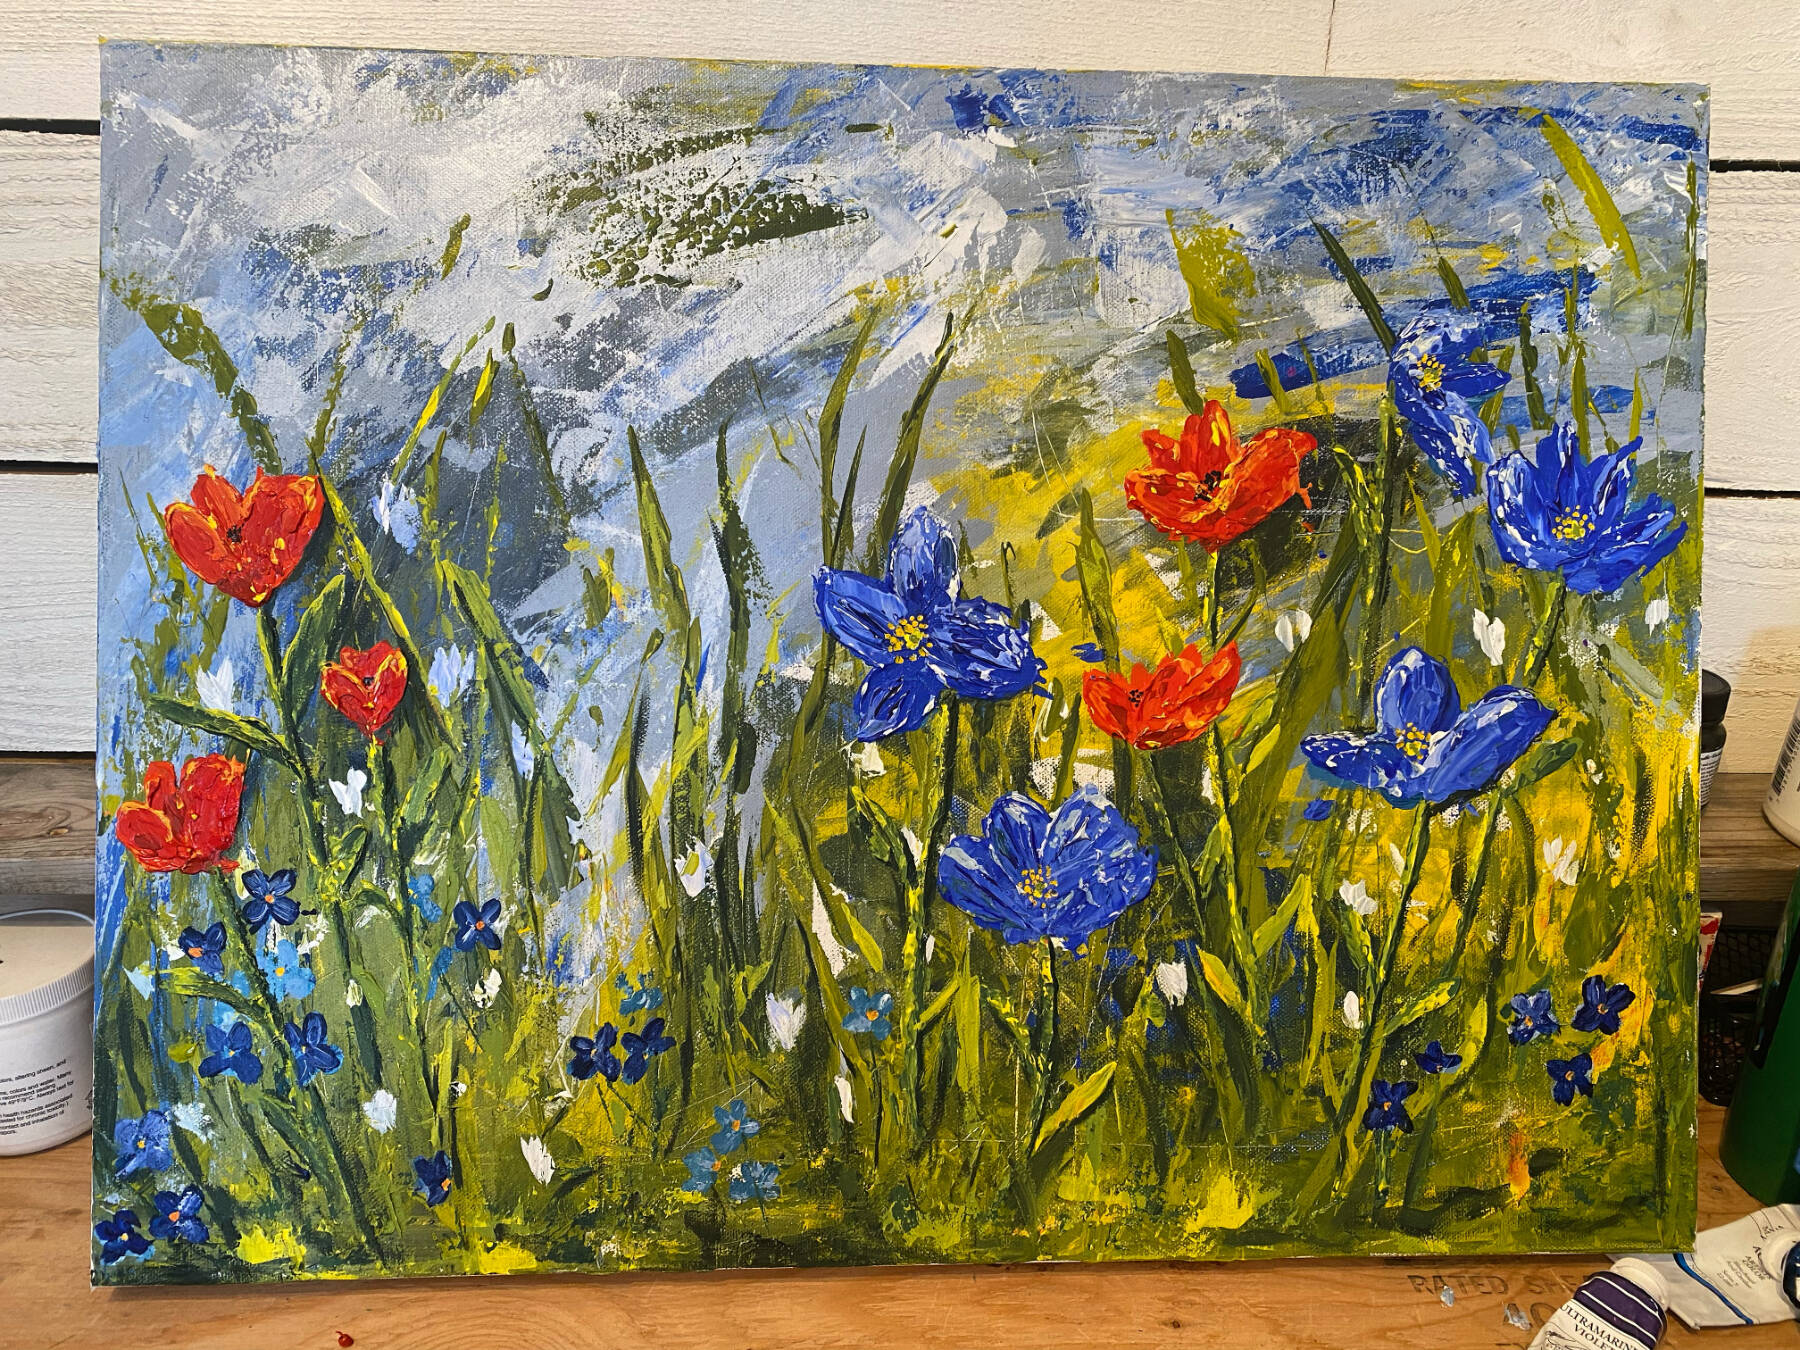 “Summer Poppies,” an acrylic medium and pallet knife painting by Tracy Hansen is on display at Grace Ridge Brewing through July. Photo courtesy of Tracy Hansen